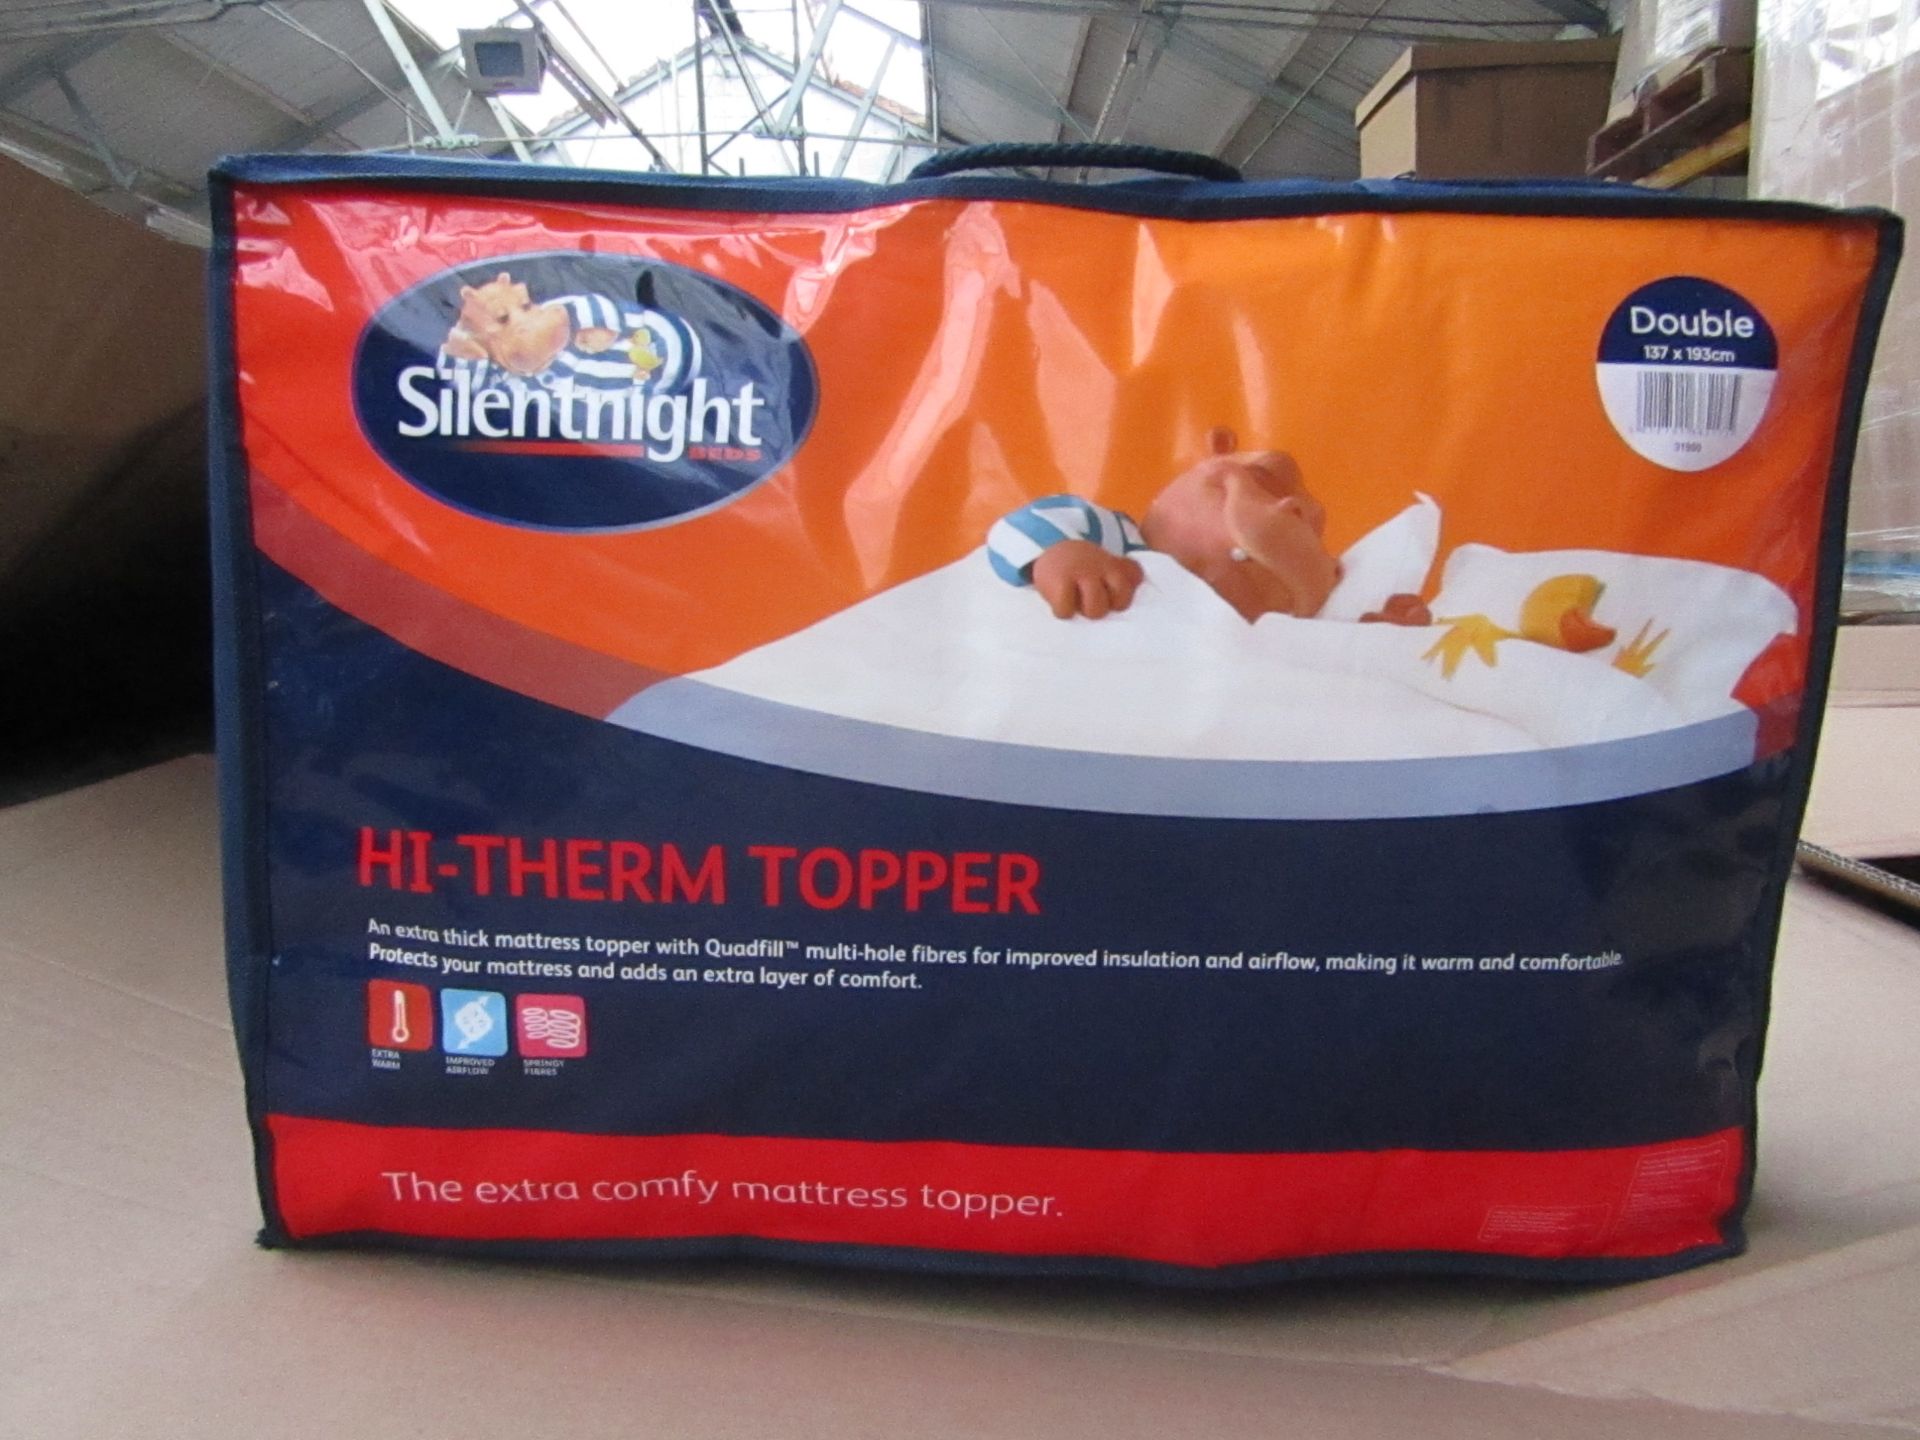 Silent Night Hi Therm Double Topper, new in carry bag